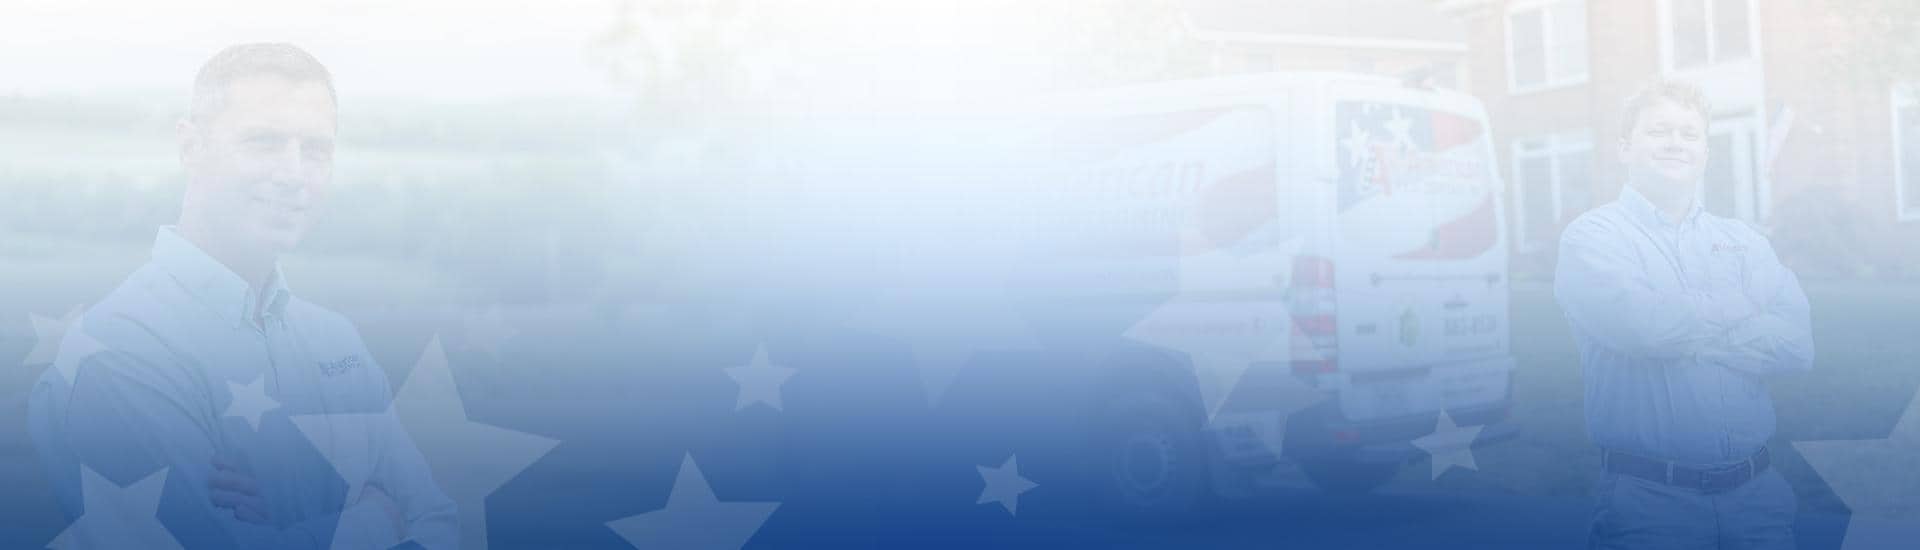 all american about us banner